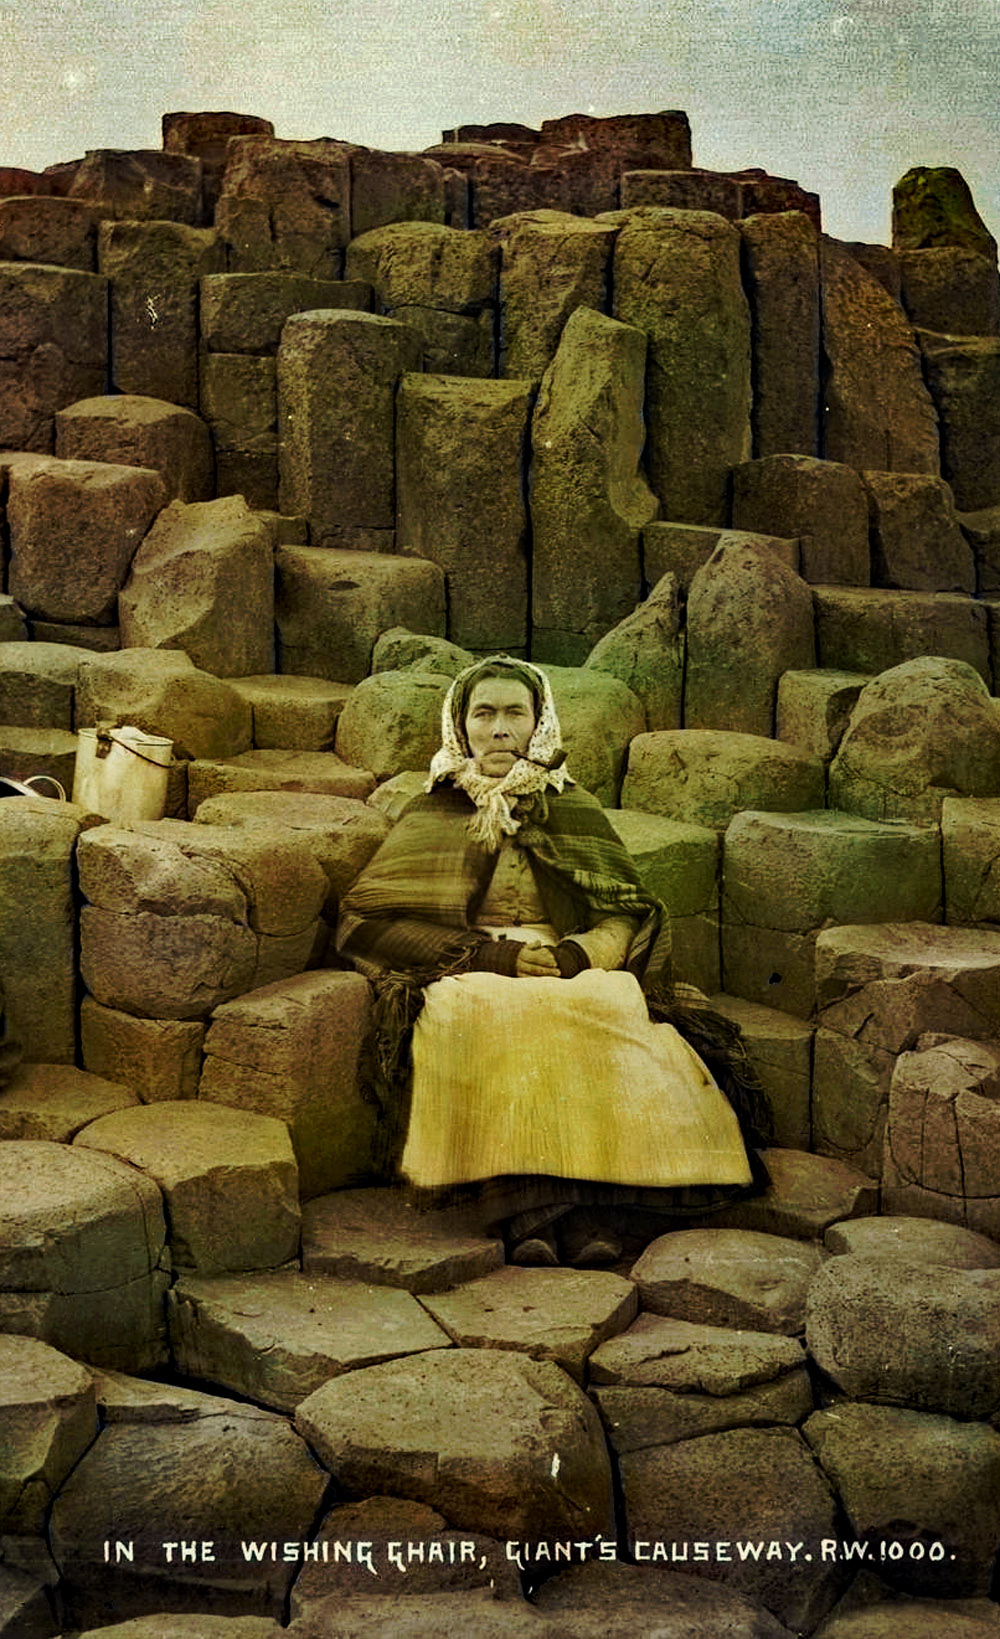 A old woman sitting on the Wishing Chair at the Giant's Causeway.